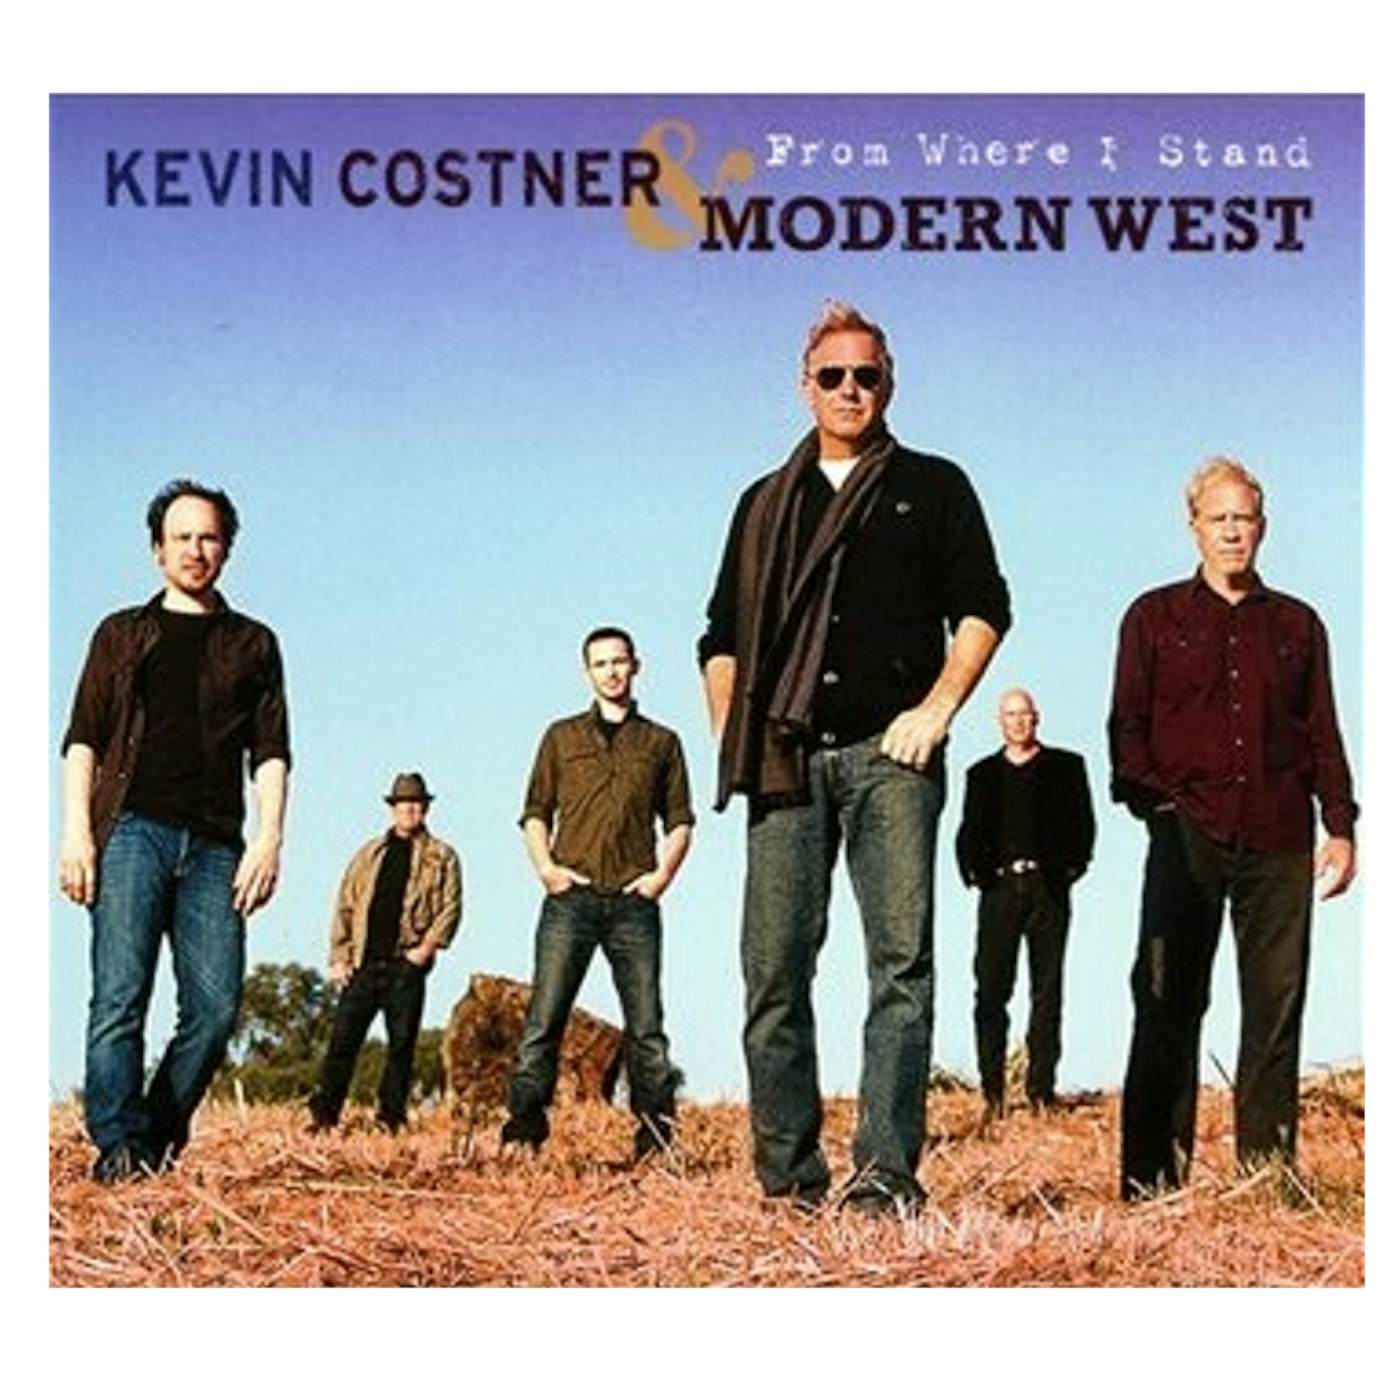 Kevin Costner & Modern West Kevin Costner and Modern West CD- From Where I Stand